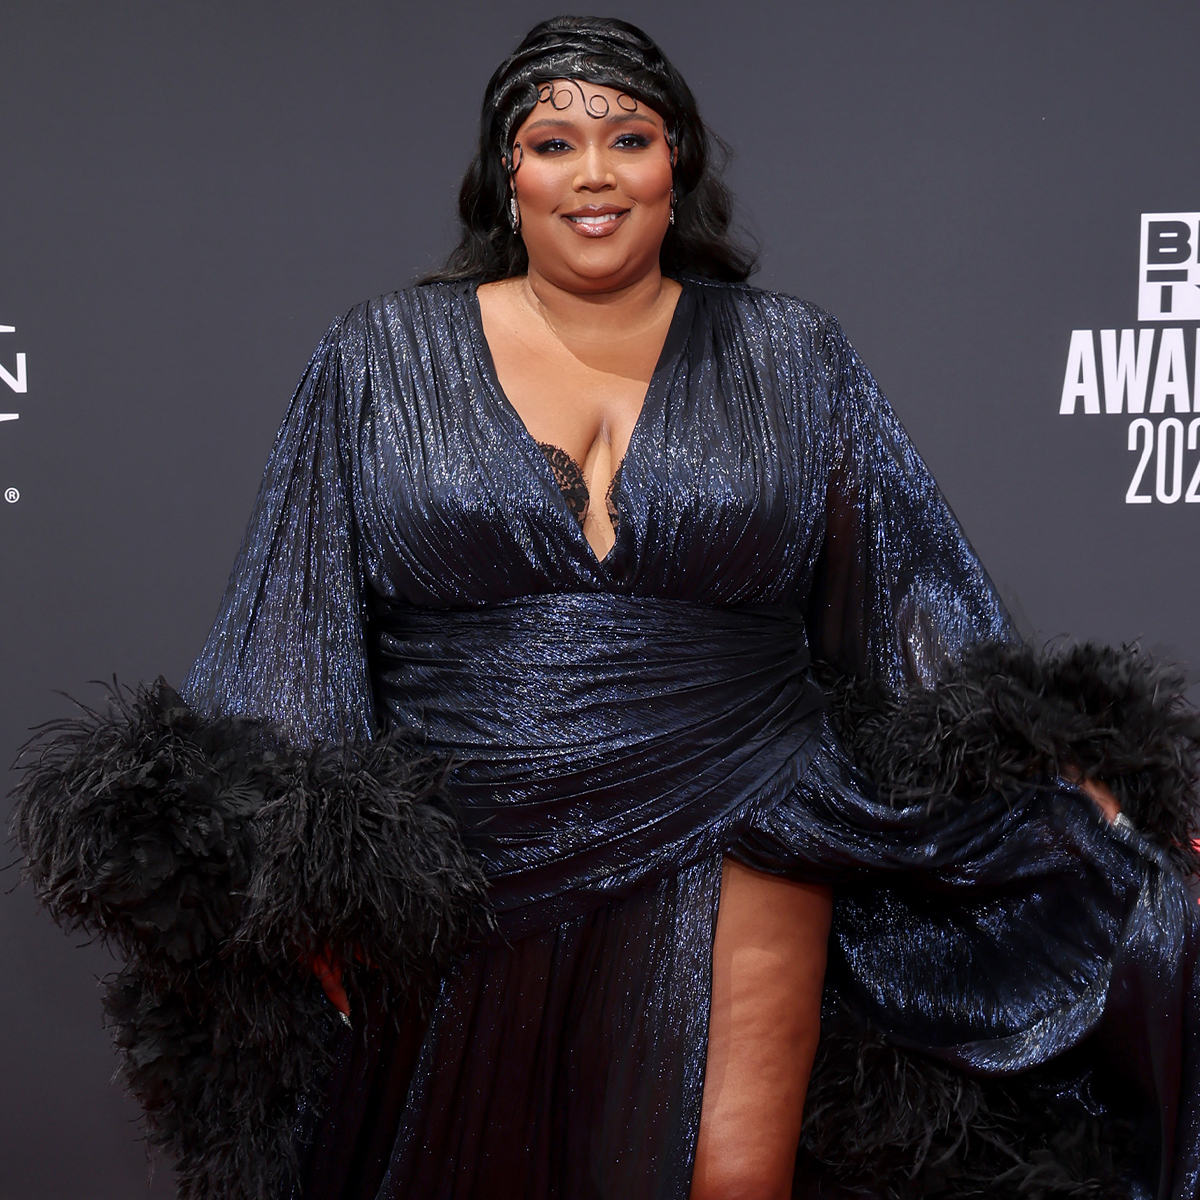 All the Rumors Are True Lizzo’s Red Carpet Look at the 2022 BET Awards